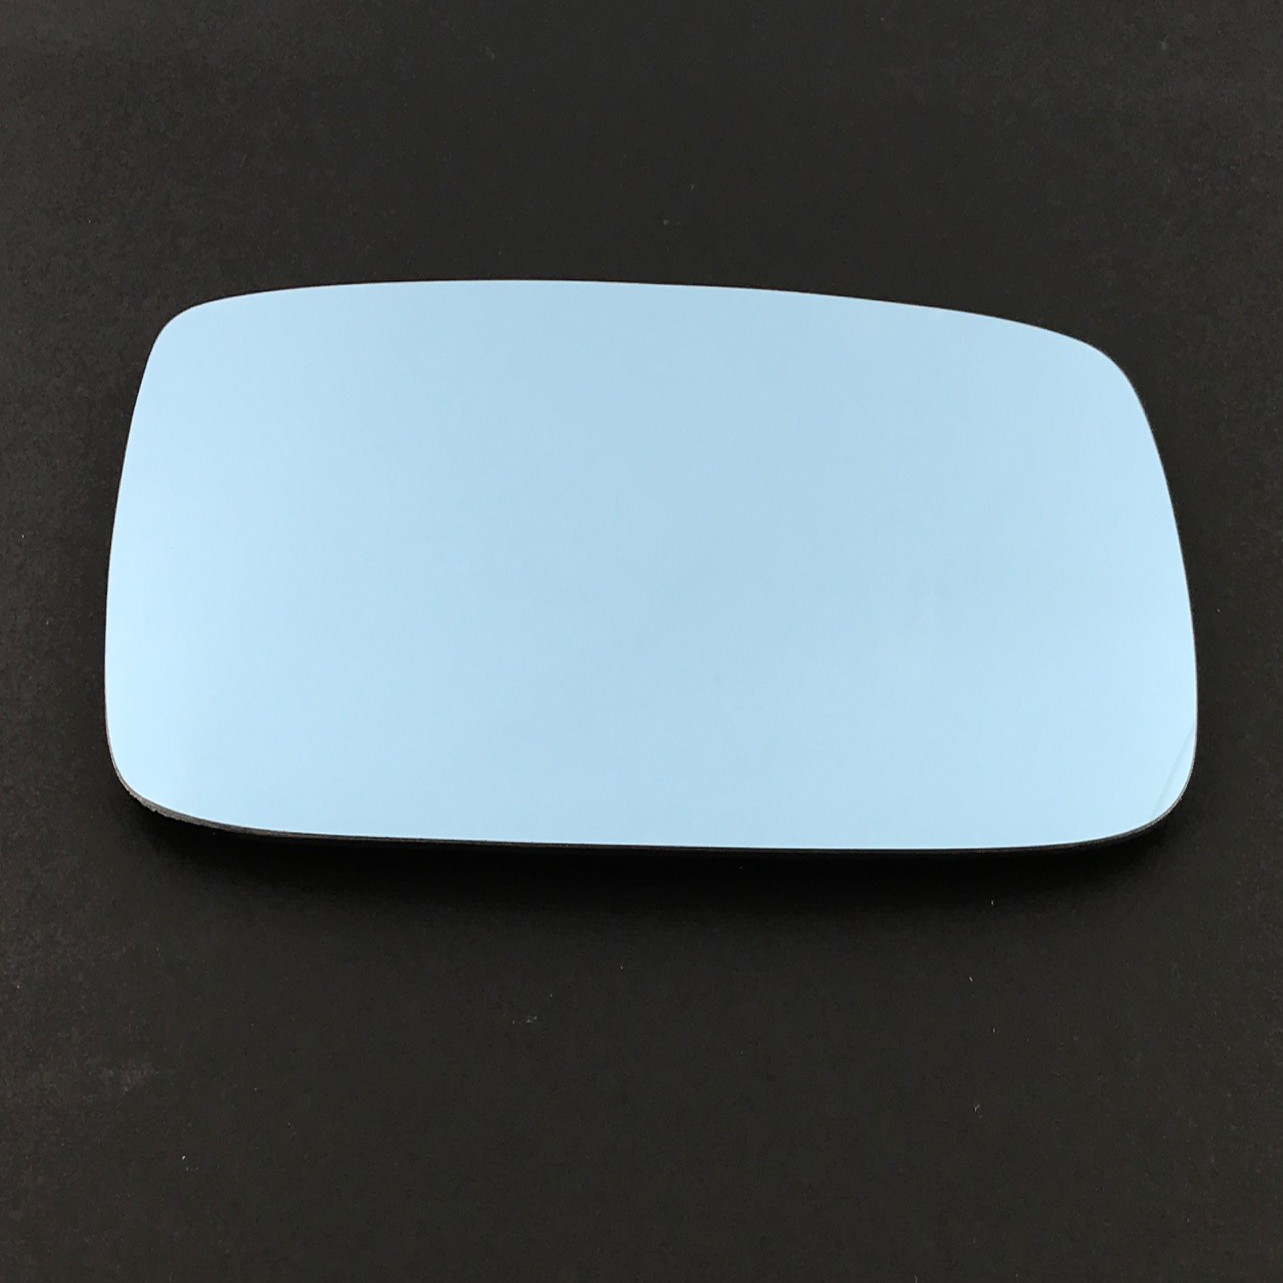 Volvo 760 Wing Mirror Glass LEFT HAND ( UK Passenger Side ) 1984 to 1992 – Convex Wing Mirror ( Blue Tinted )